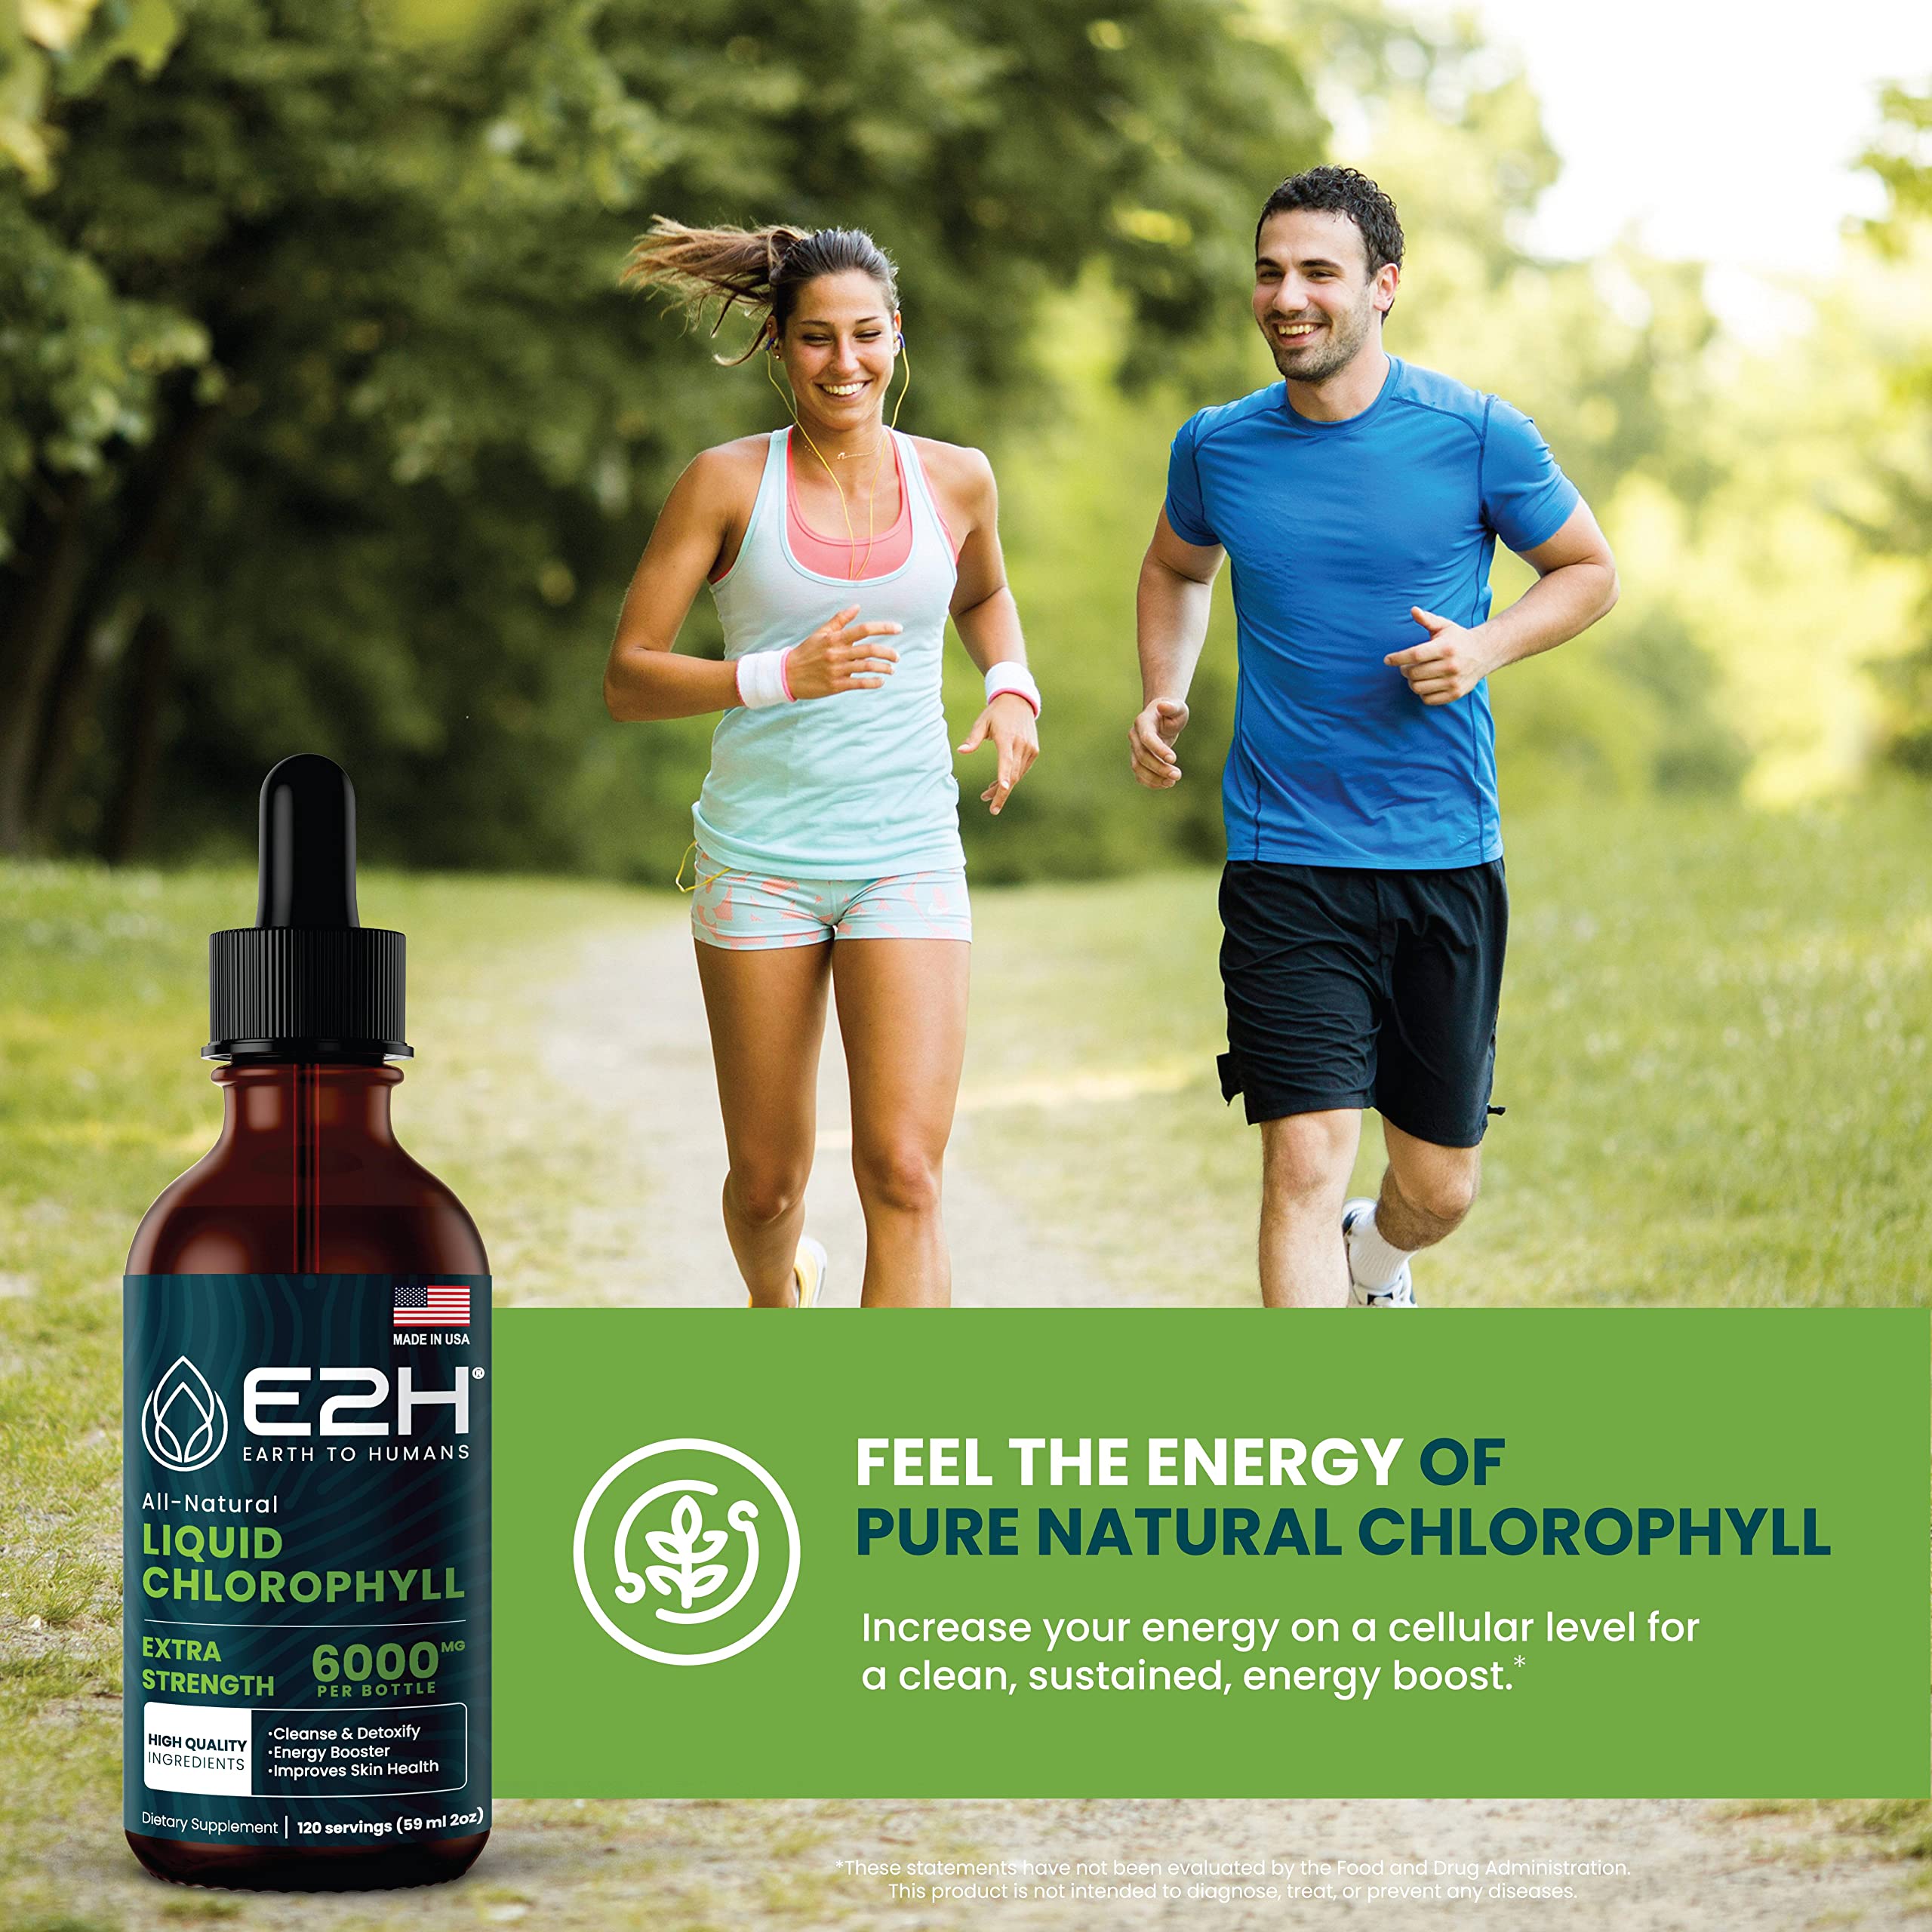 E2H Chlorophyll Liquid Drops - All-Natural Flavored Energy Booster, Immune System Support and Internal Deodorant - Vegan - Gluten Free - Non-GMO - 2 Fl Oz